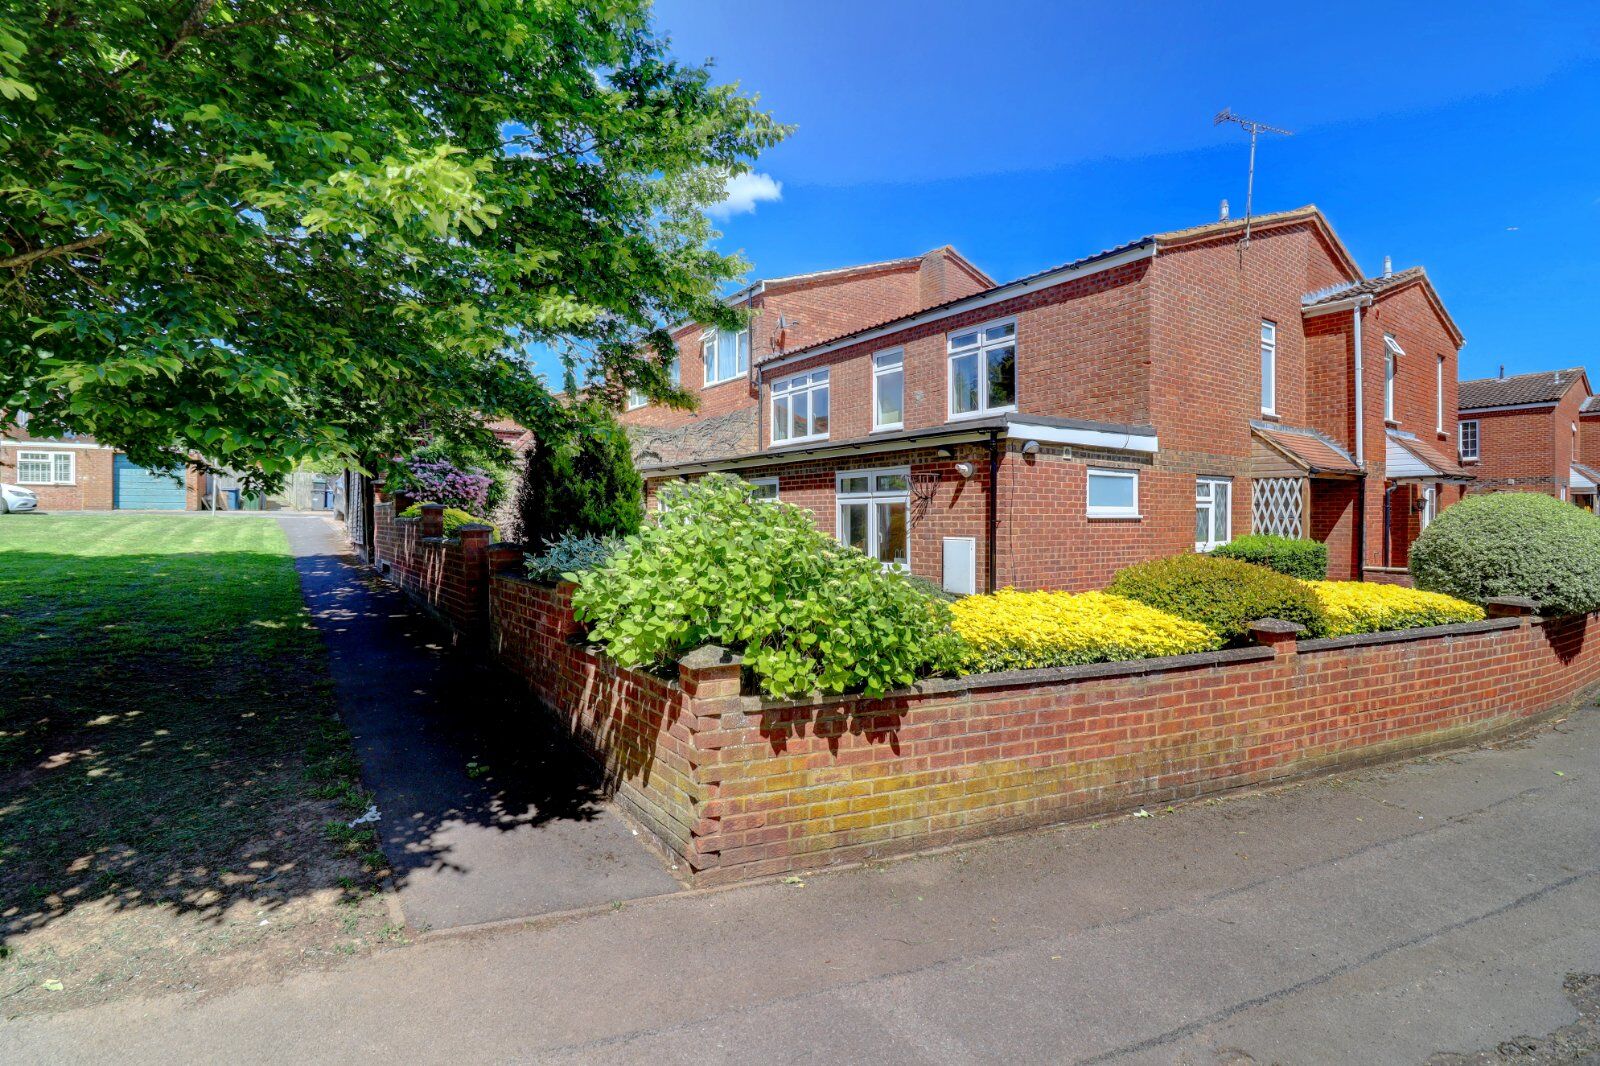 4 bedroom end terraced house for sale Shrimpton Road, High Wycombe, HP12, main image